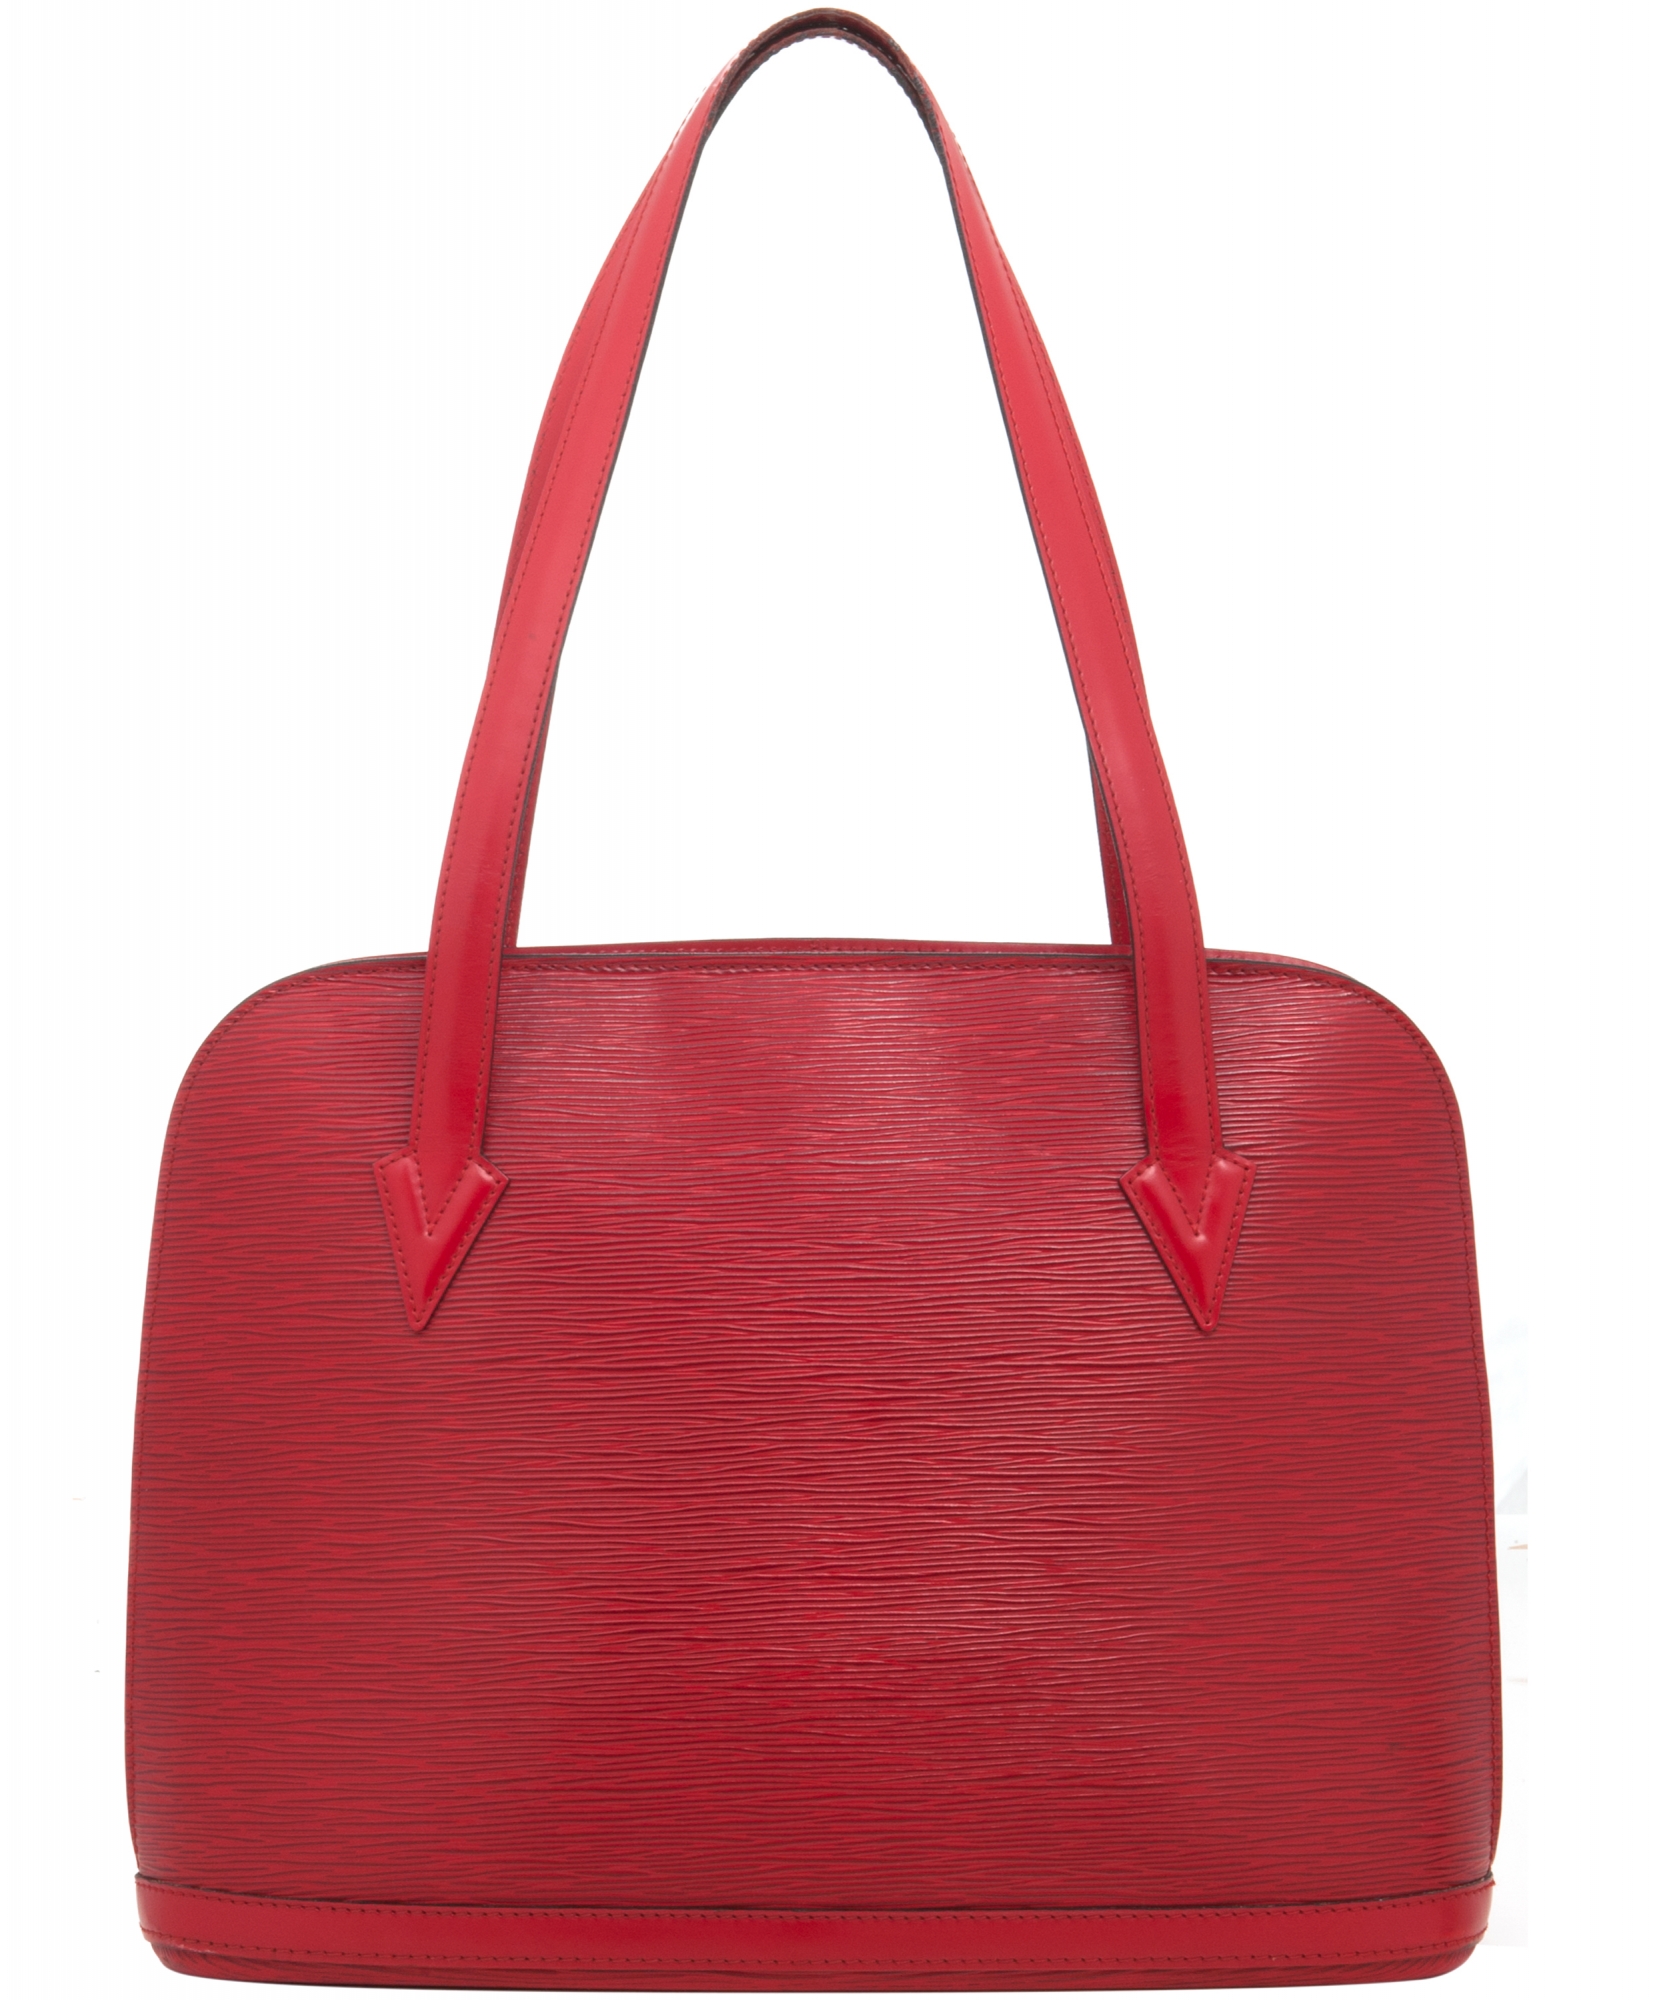 Louis Vuitton Style Tote Bag | Red